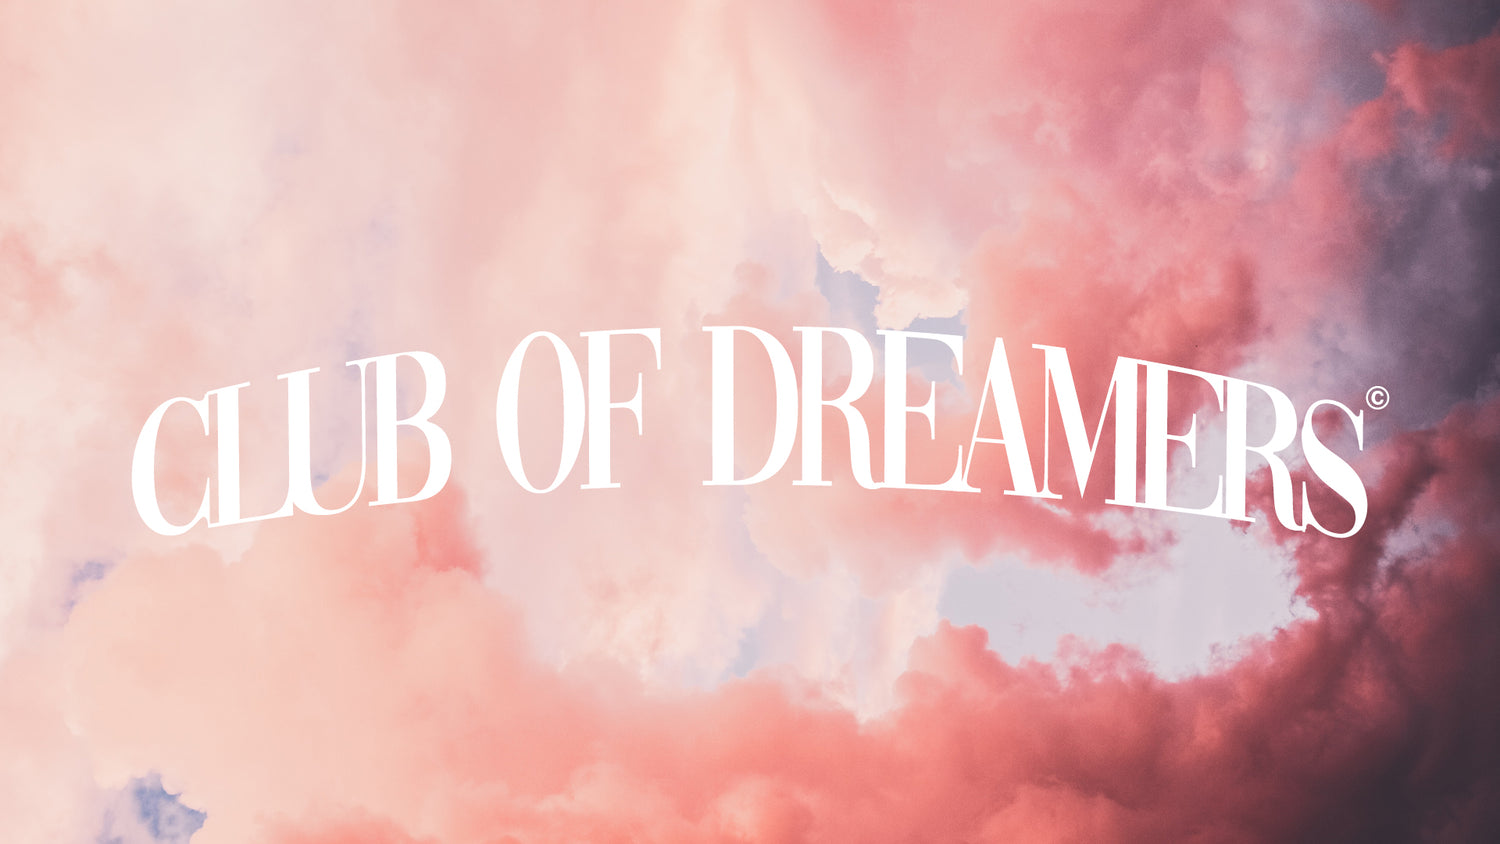 Club of dreamers, clubofdreamers, dreamer, dreamers